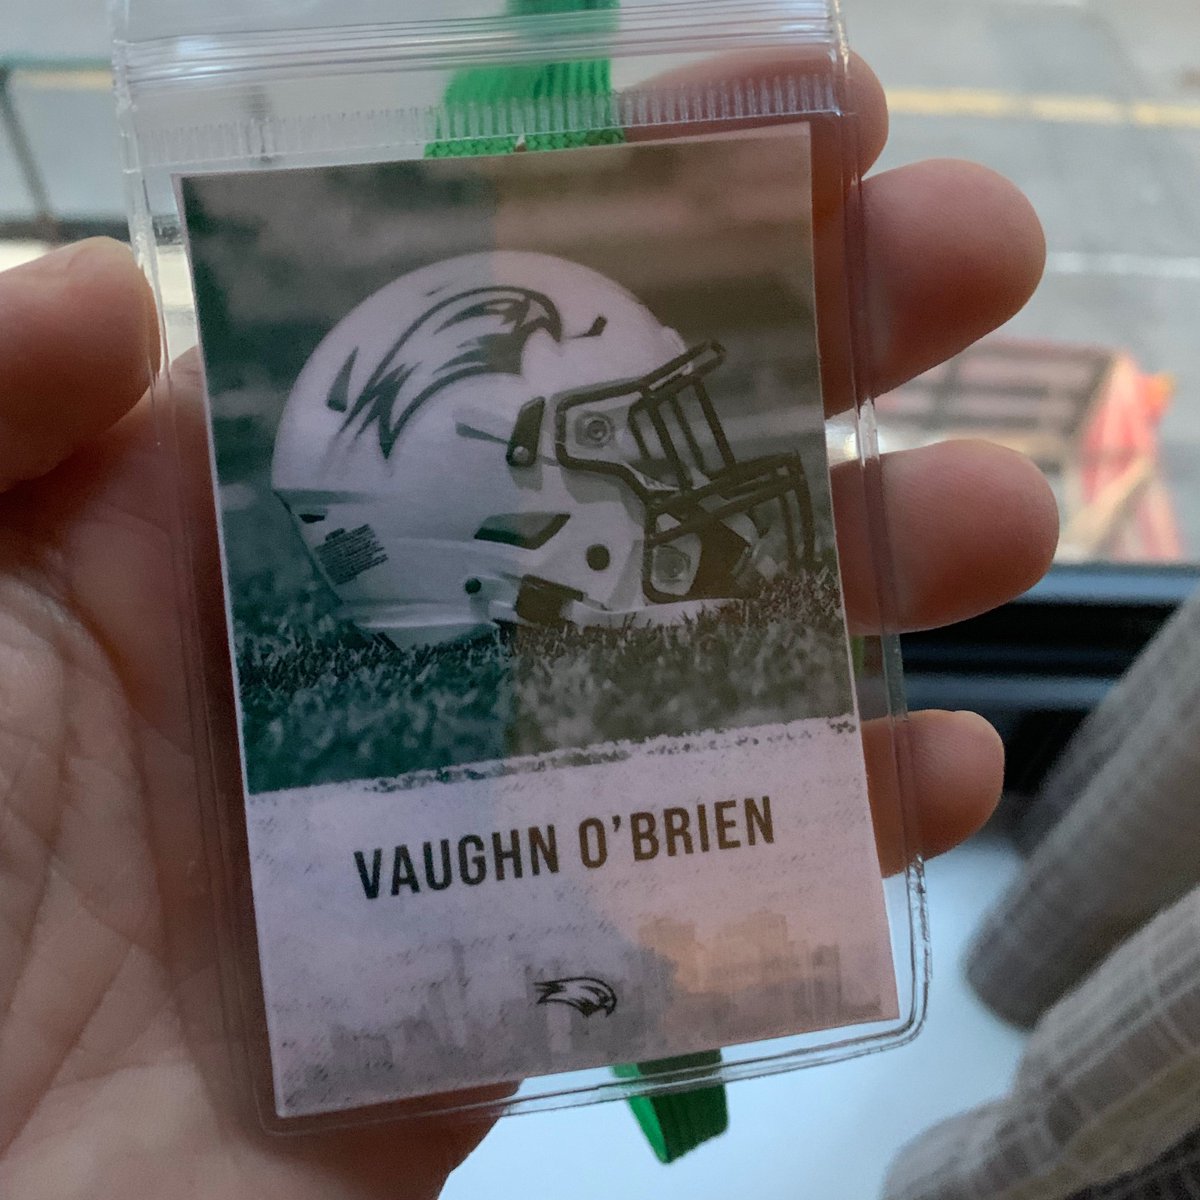 Had a great visit at @Wagner_Football. Thank you @coachsotoj, @tommasella and all the Wagner coaches for an awesome experience. #LetsFly @coachrodharris @CoachDustinPao @ESPNTop63 @larryblustein @CountyTigers_fb @PatBernadeau @EraPrep @PrepRedzoneFL @FLVarsityRivals